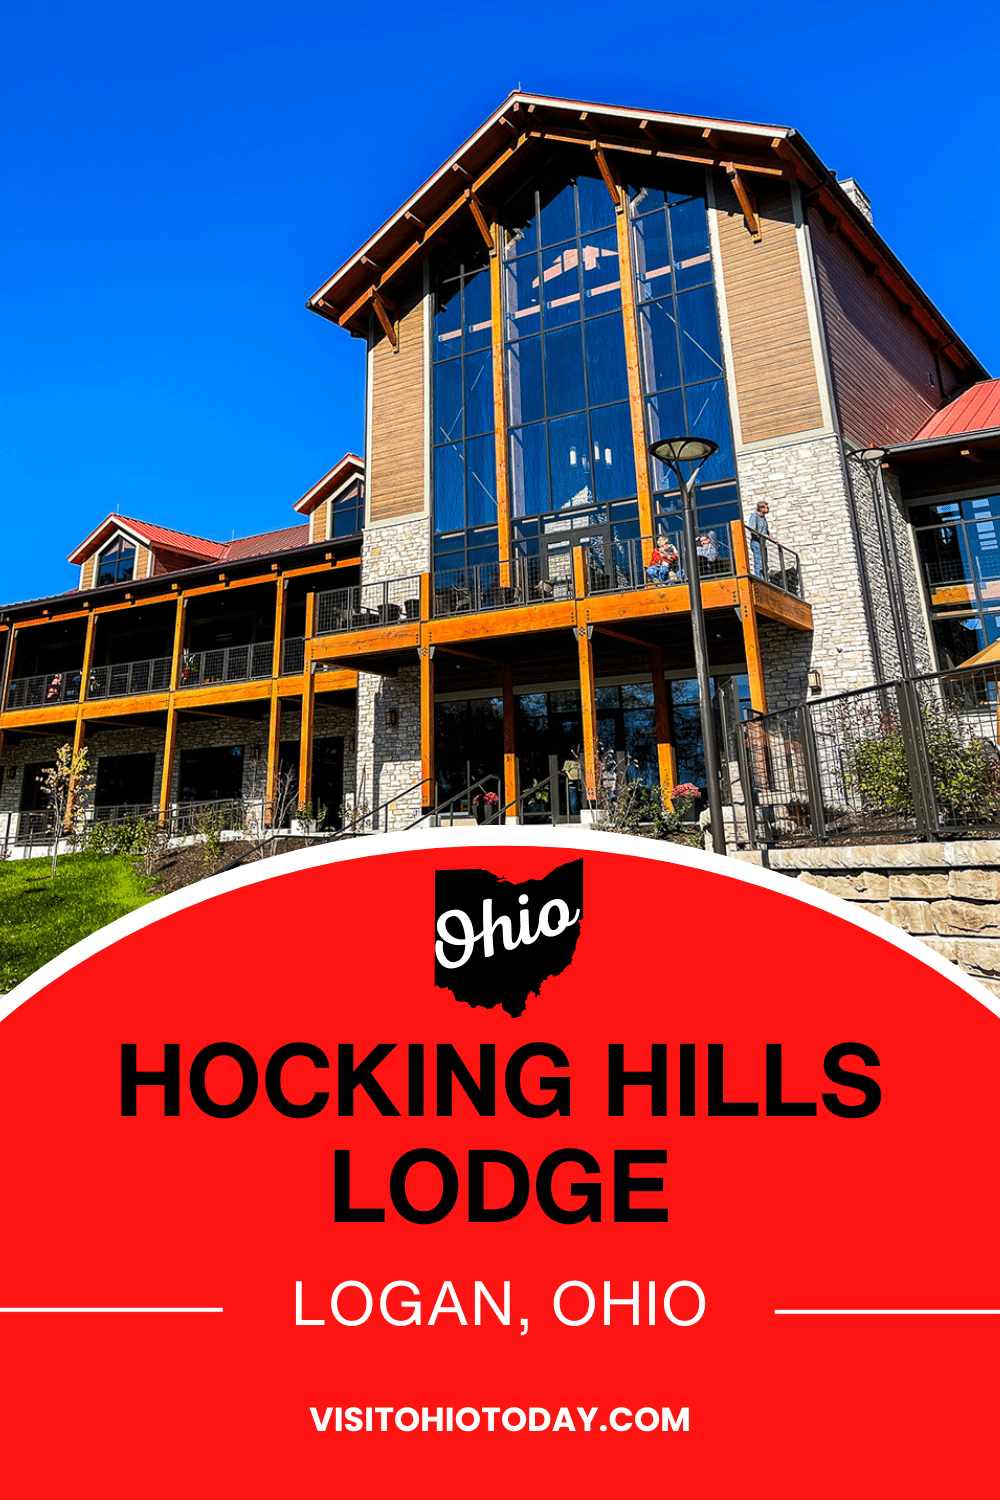 Hocking Hills Lodge is a mix of rustic beauty and modern elegance in a full-service lodge, located in Logan.